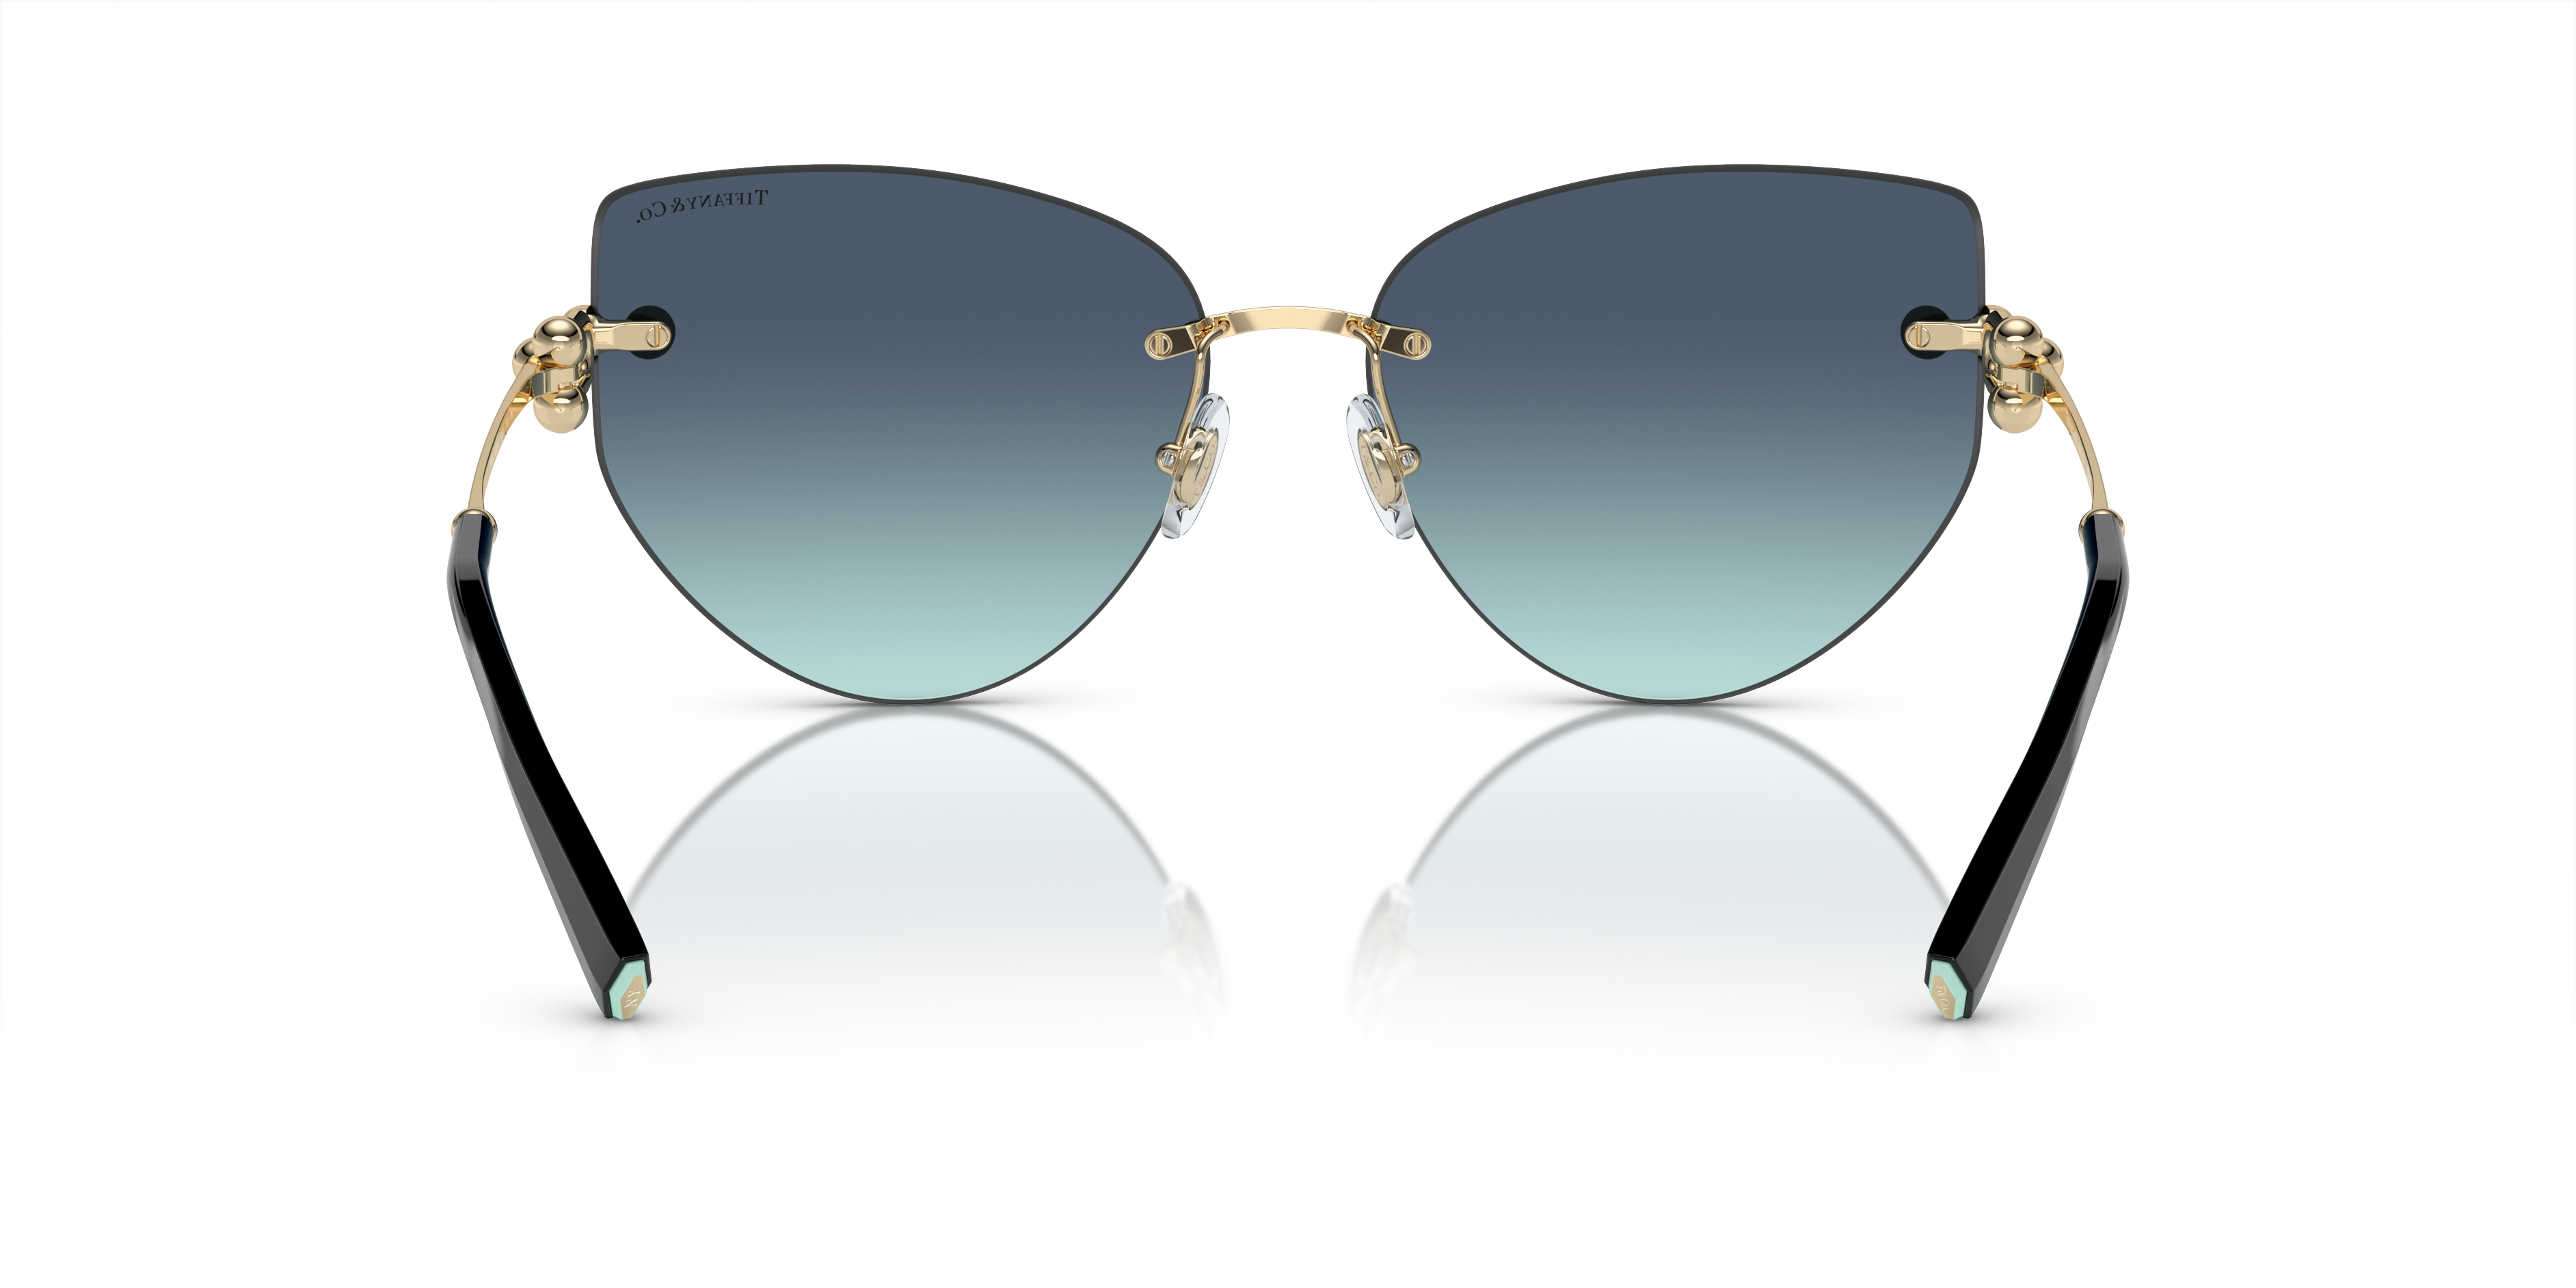 [products.image.detail02] Tiffany & Co TF 3096 Sunglasses